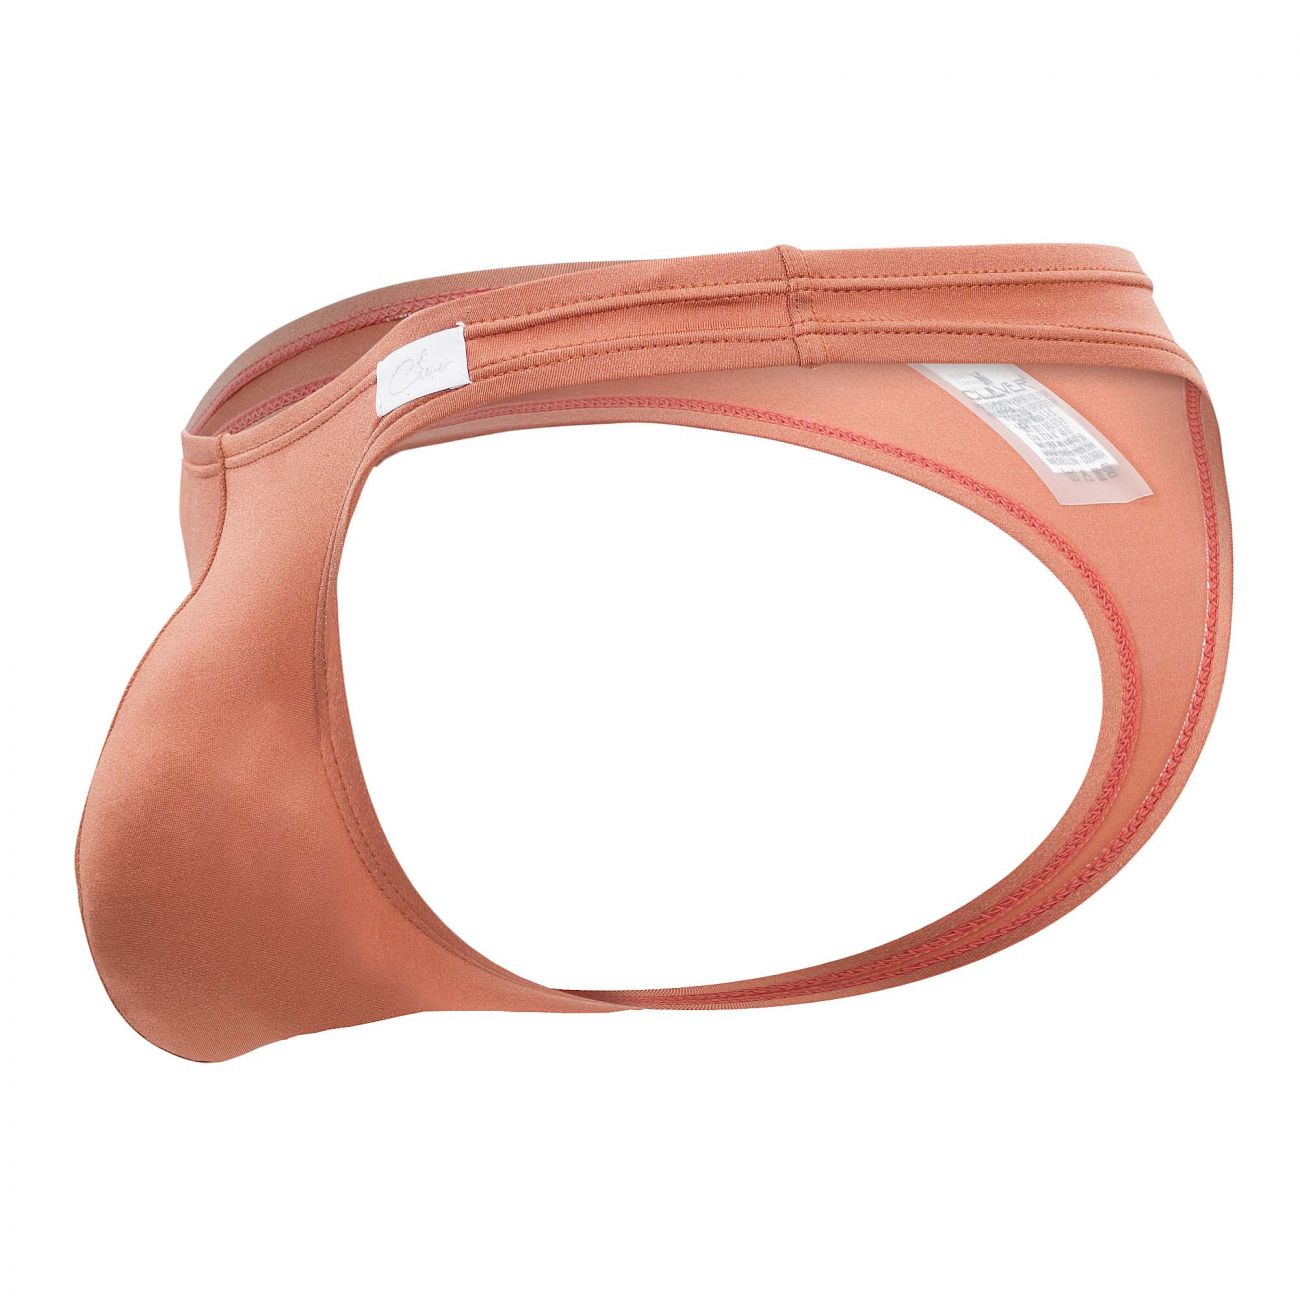 Clever 0370 Turn Thongs Ochre